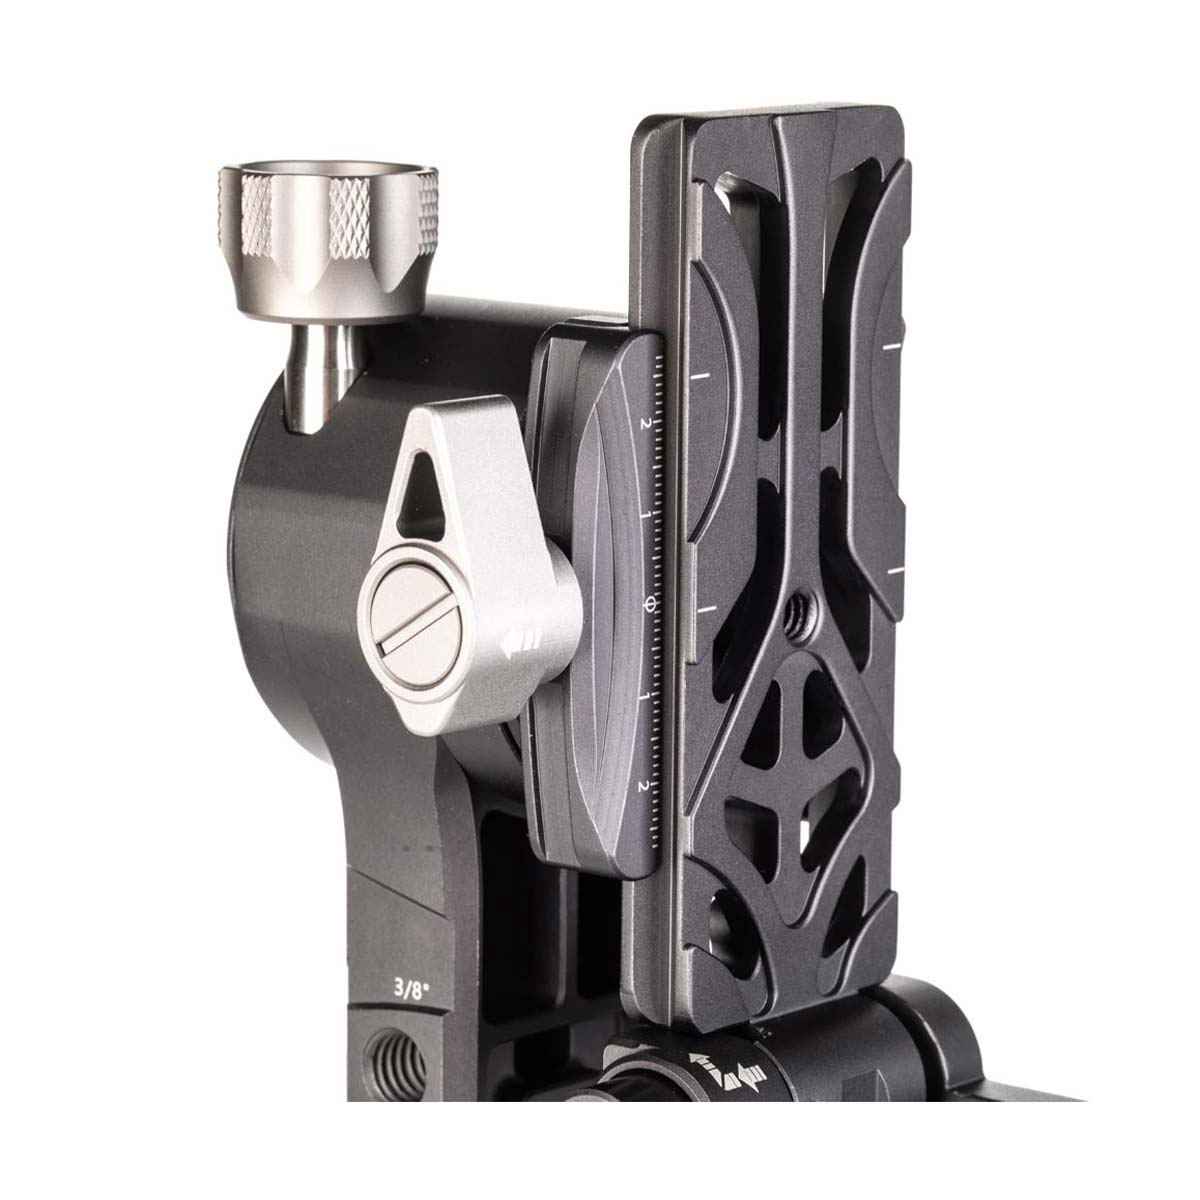 Benro Folding Gimbal Head with Arca-Type Quick Release Plate